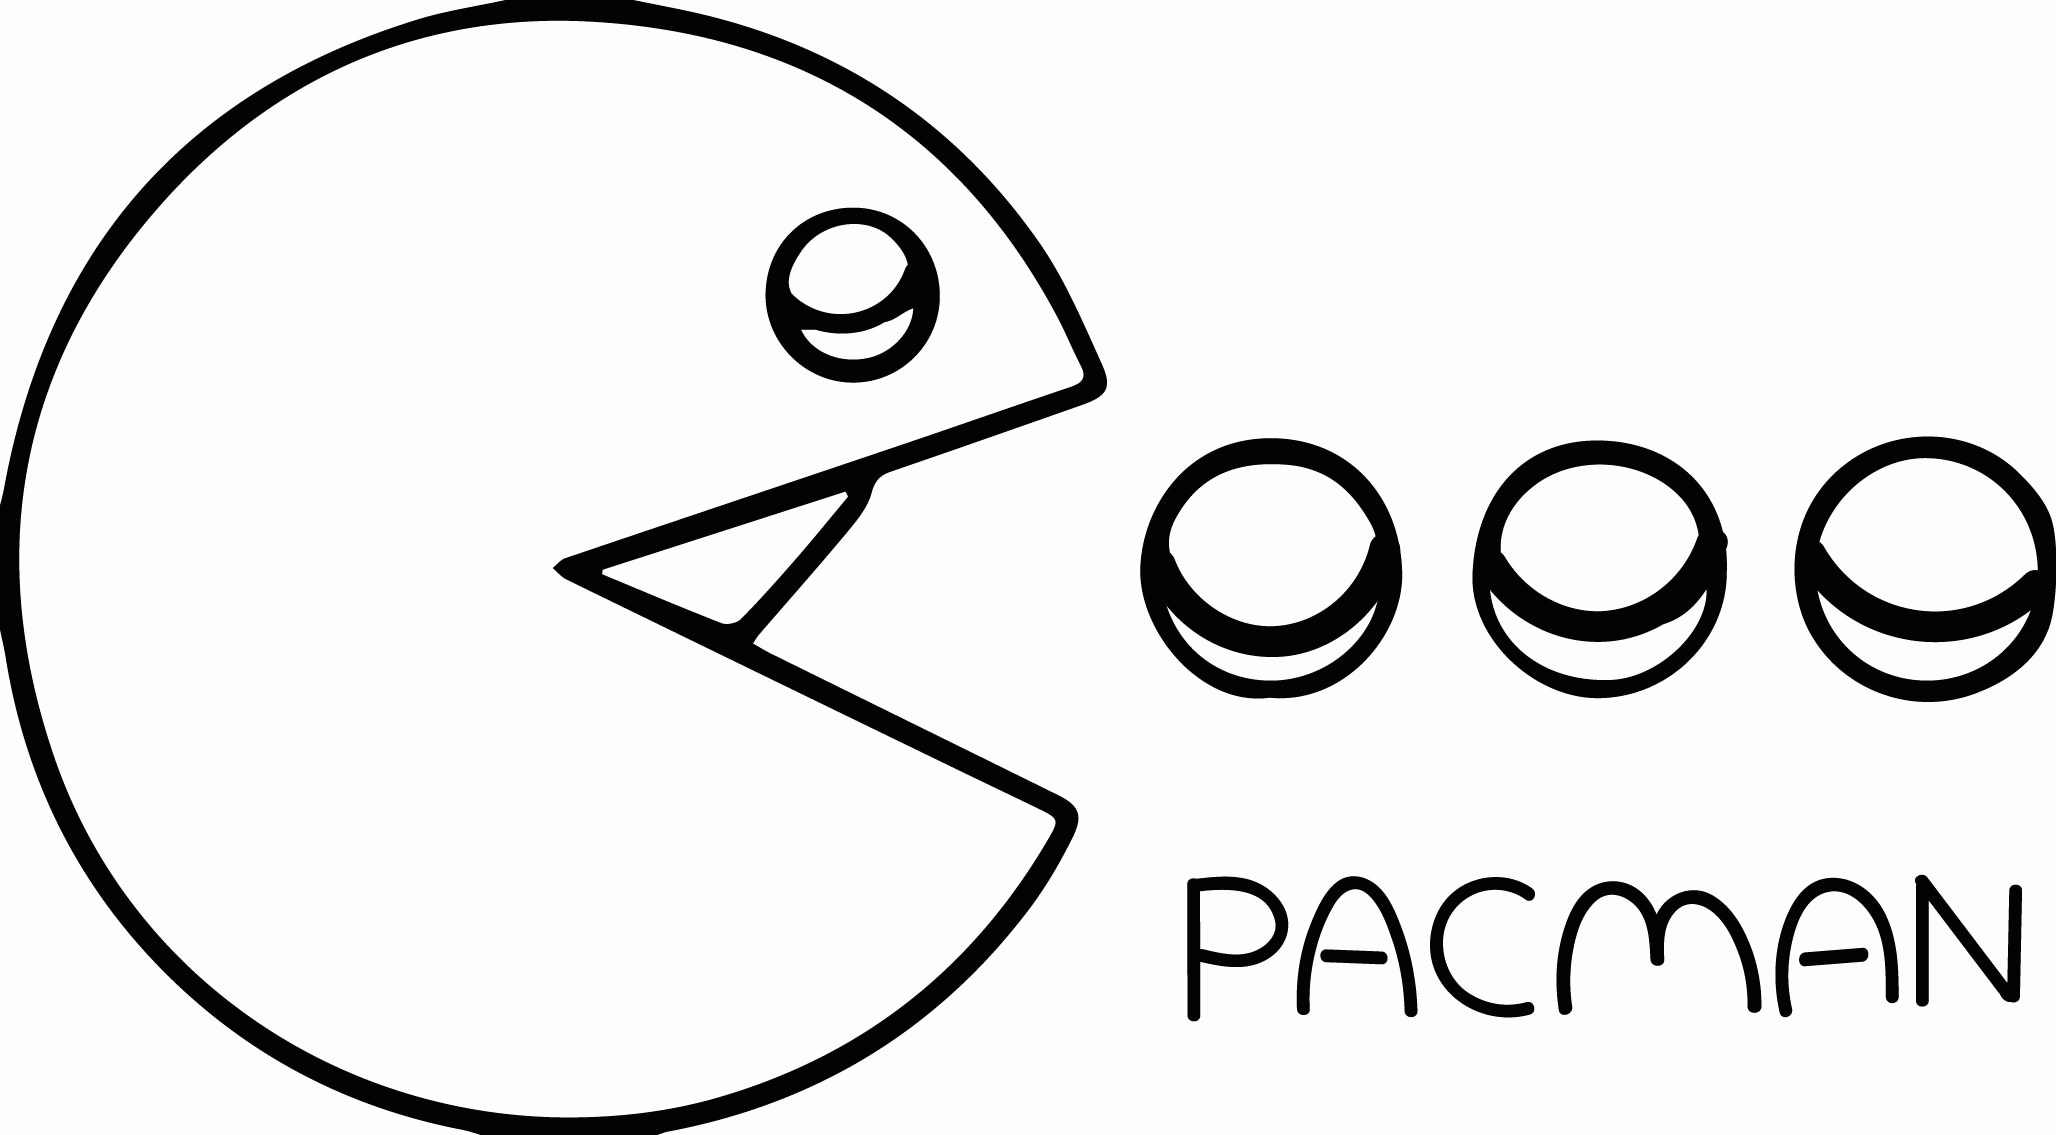 Pacman Coloring Page High Quality Coloring Pages Coloring Home